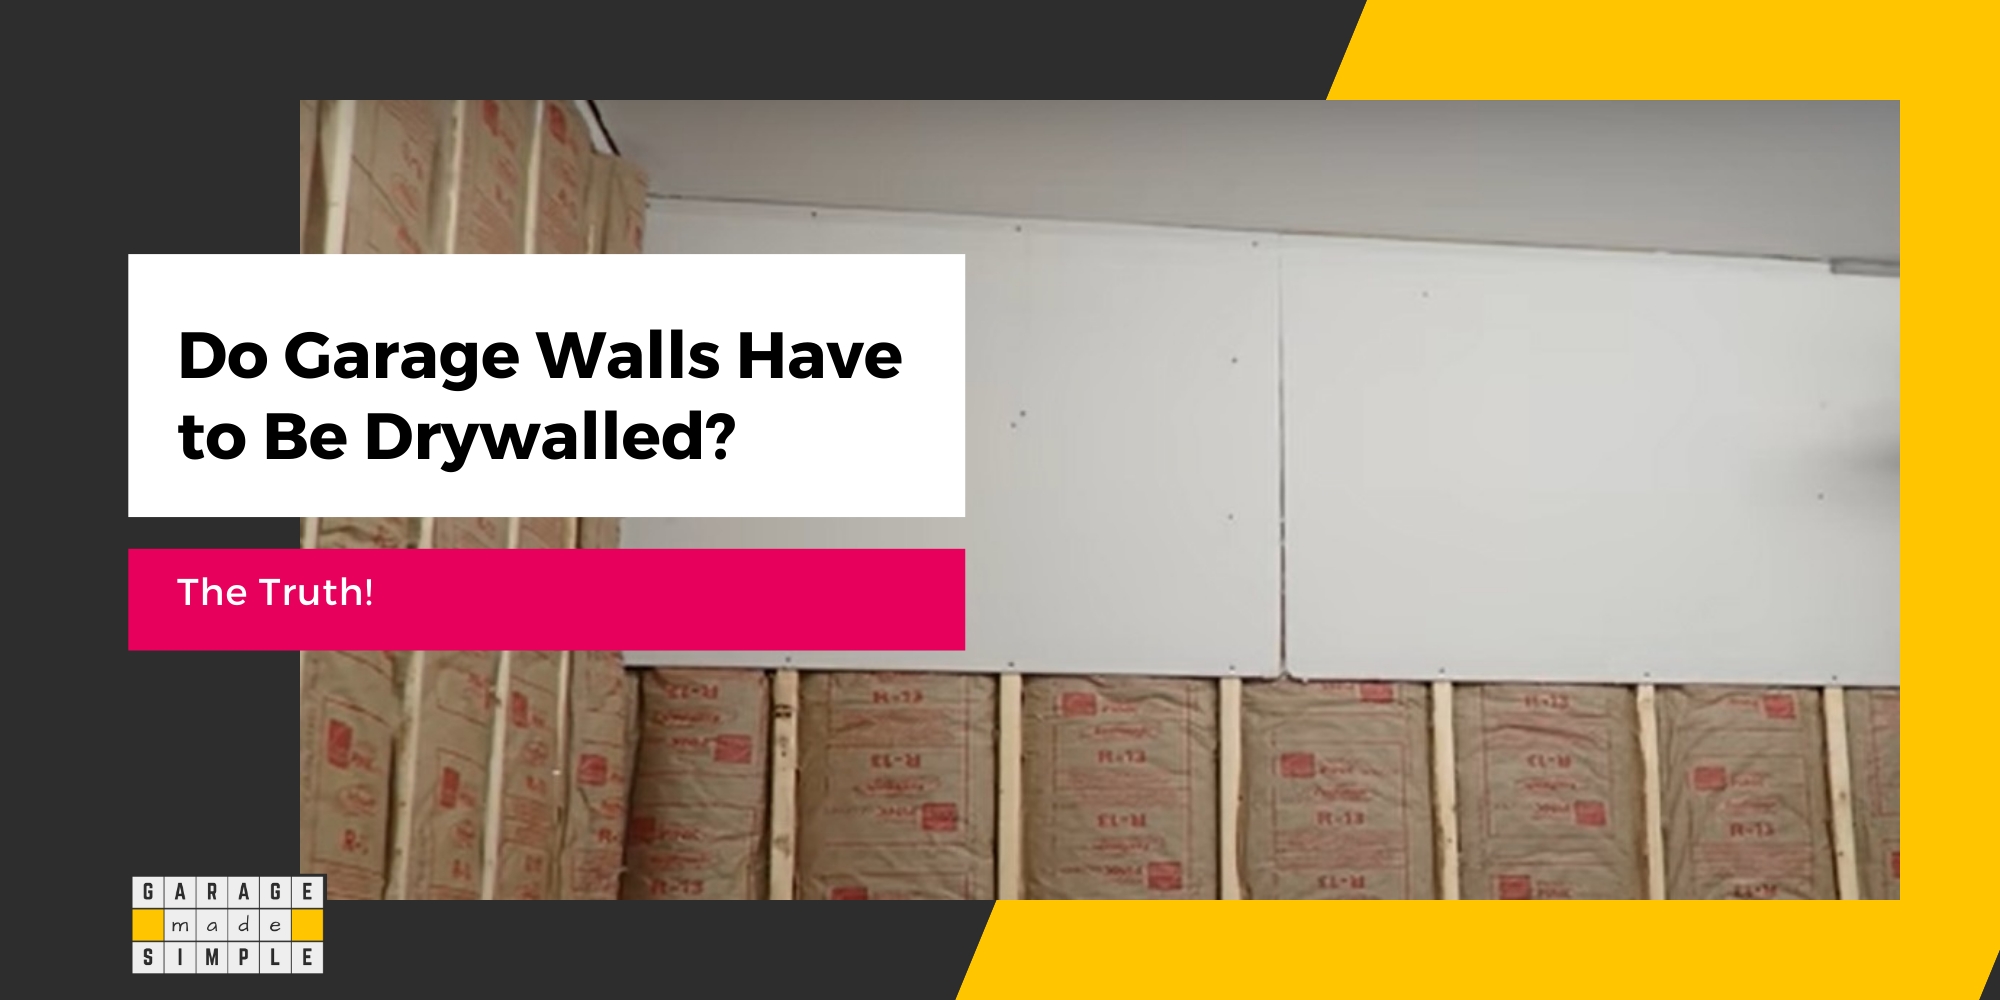 Do Garage Walls Have To Be Drywalled?